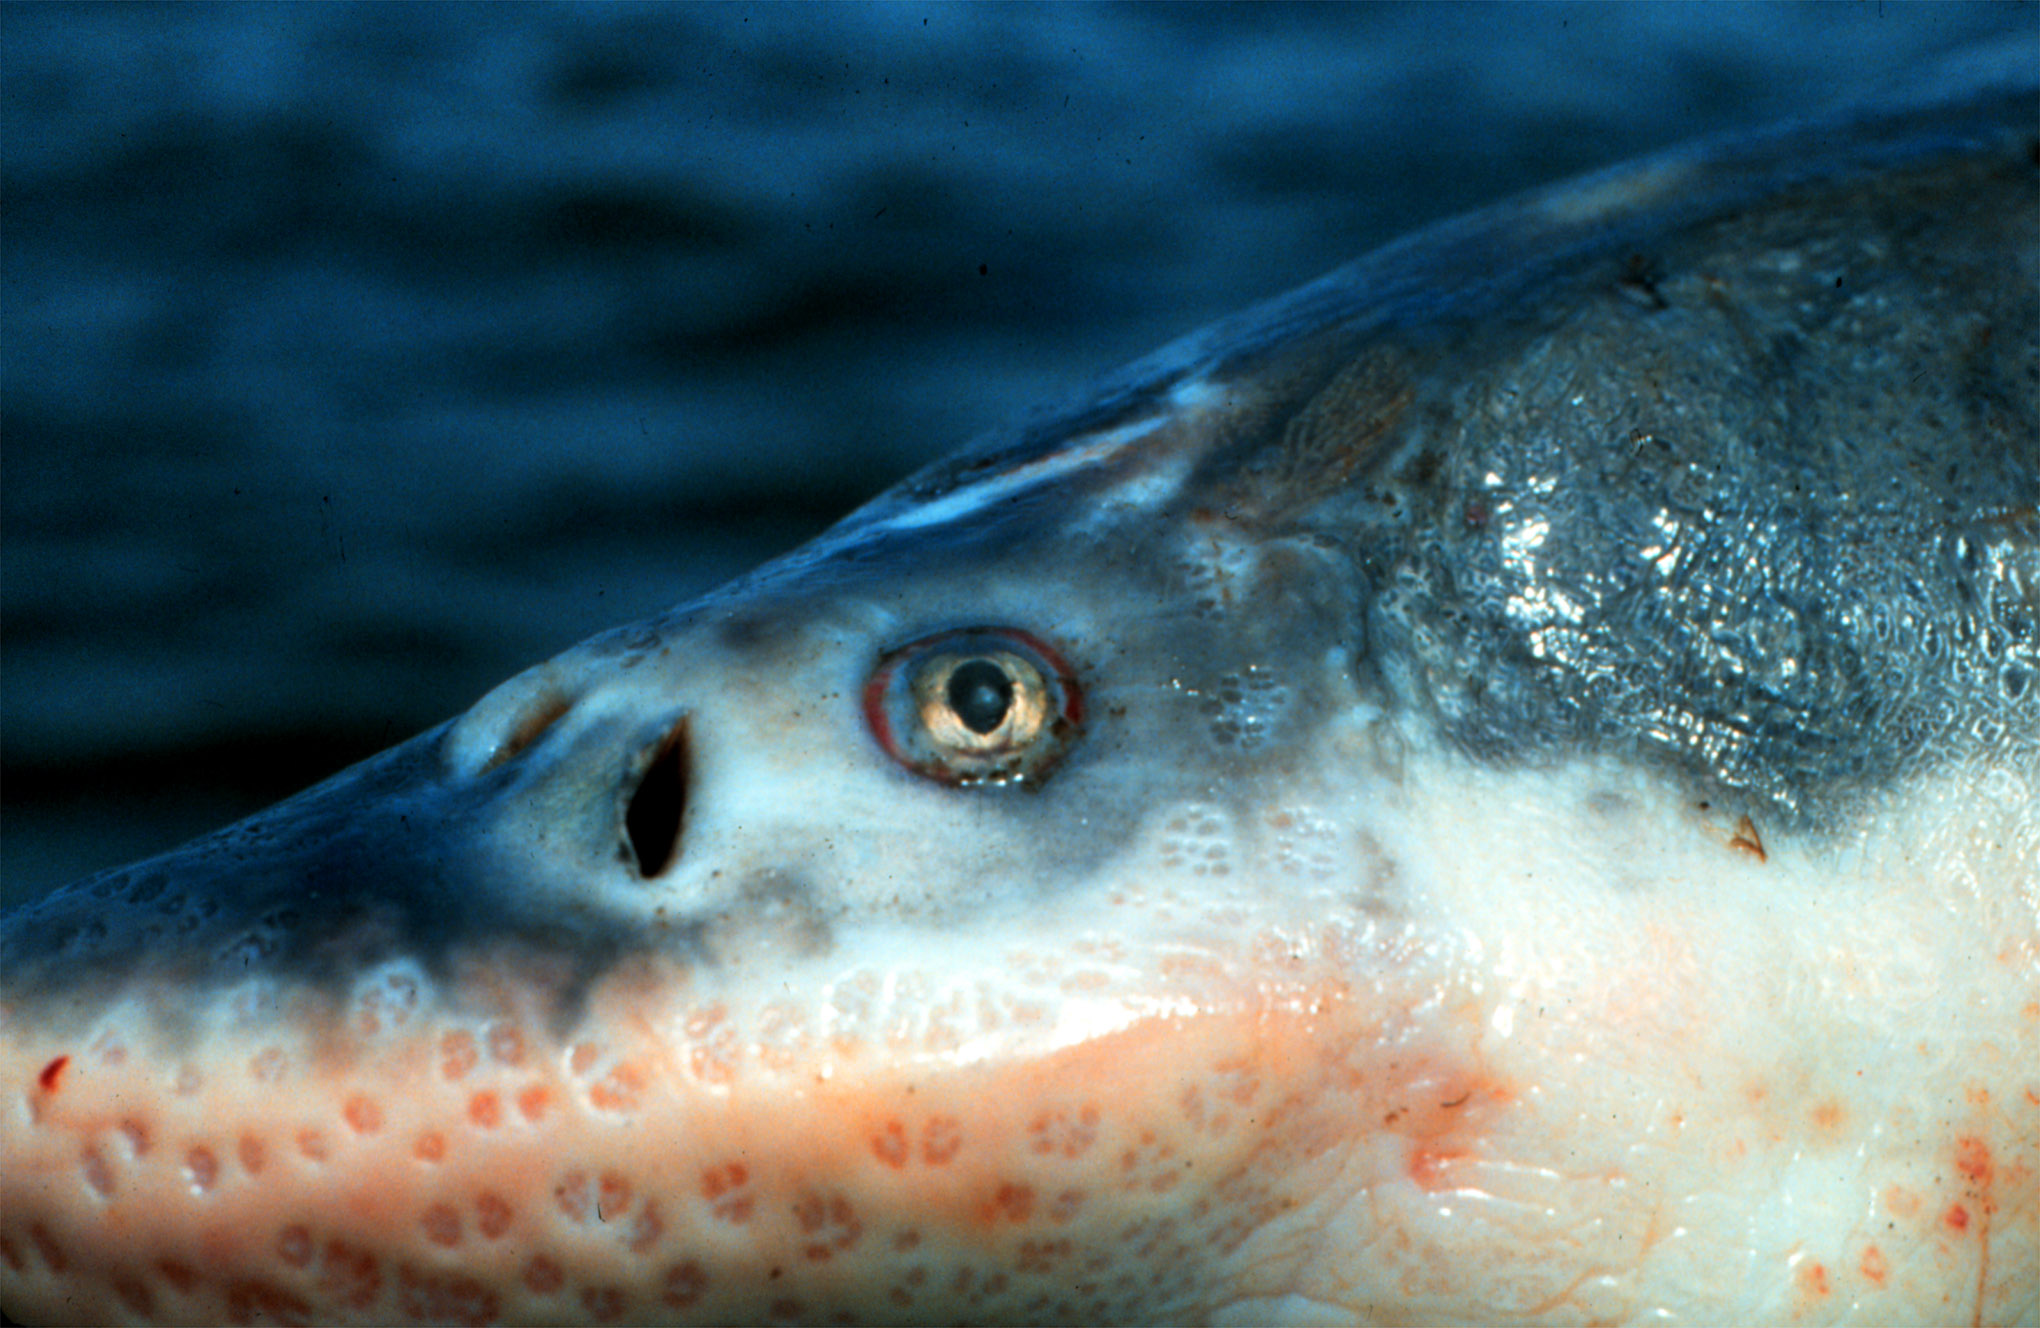 There will be no retention of sturgeon allowed in the lower Columbia River in 2014.